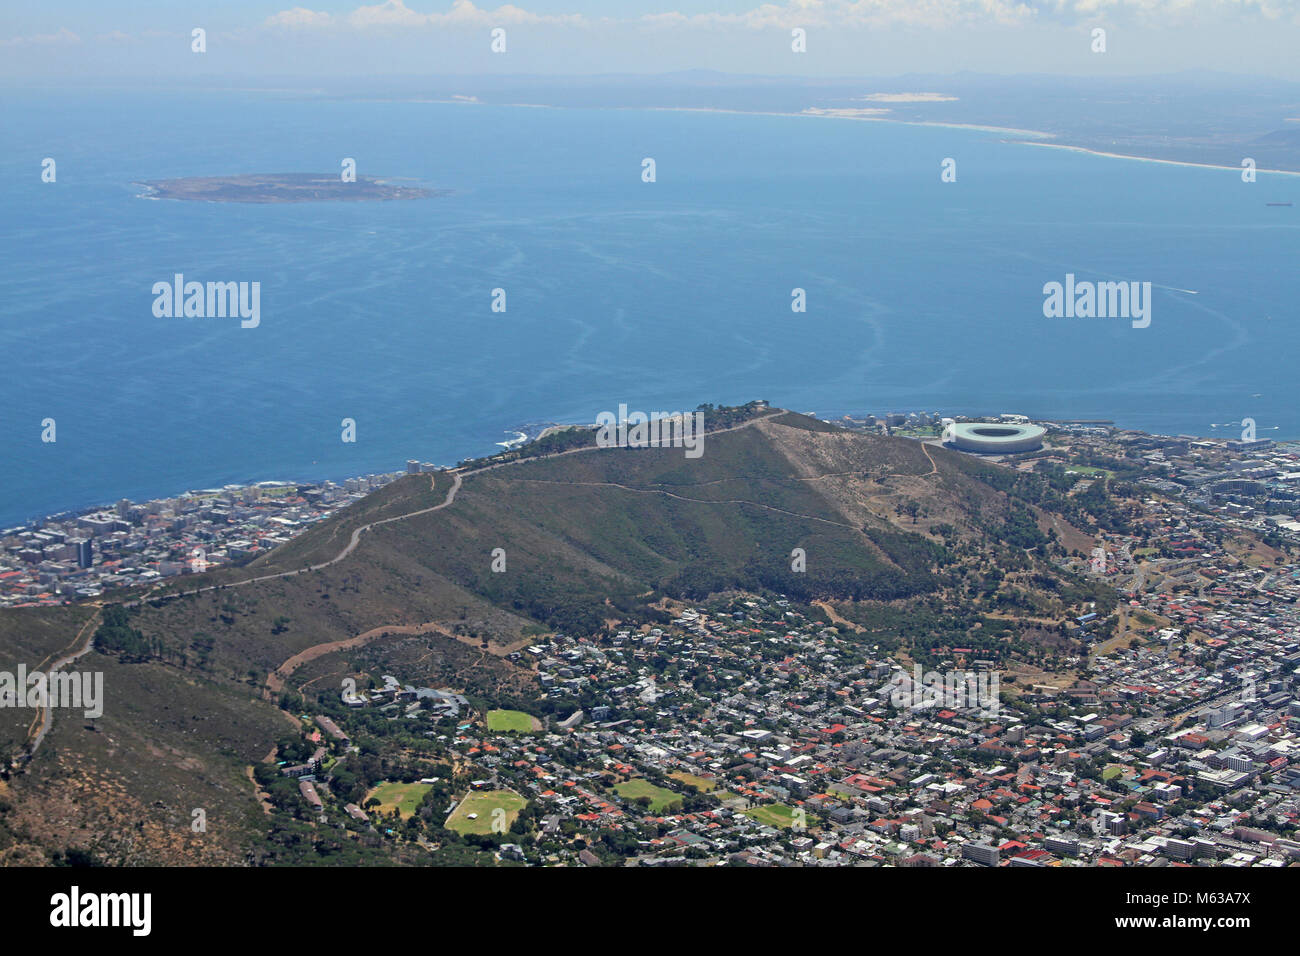 View of Signal Hill, Cape Town Stadium and Robben Island from the top of Table Mountain, Cape Town, Western Cape, South Africa. Stock Photo